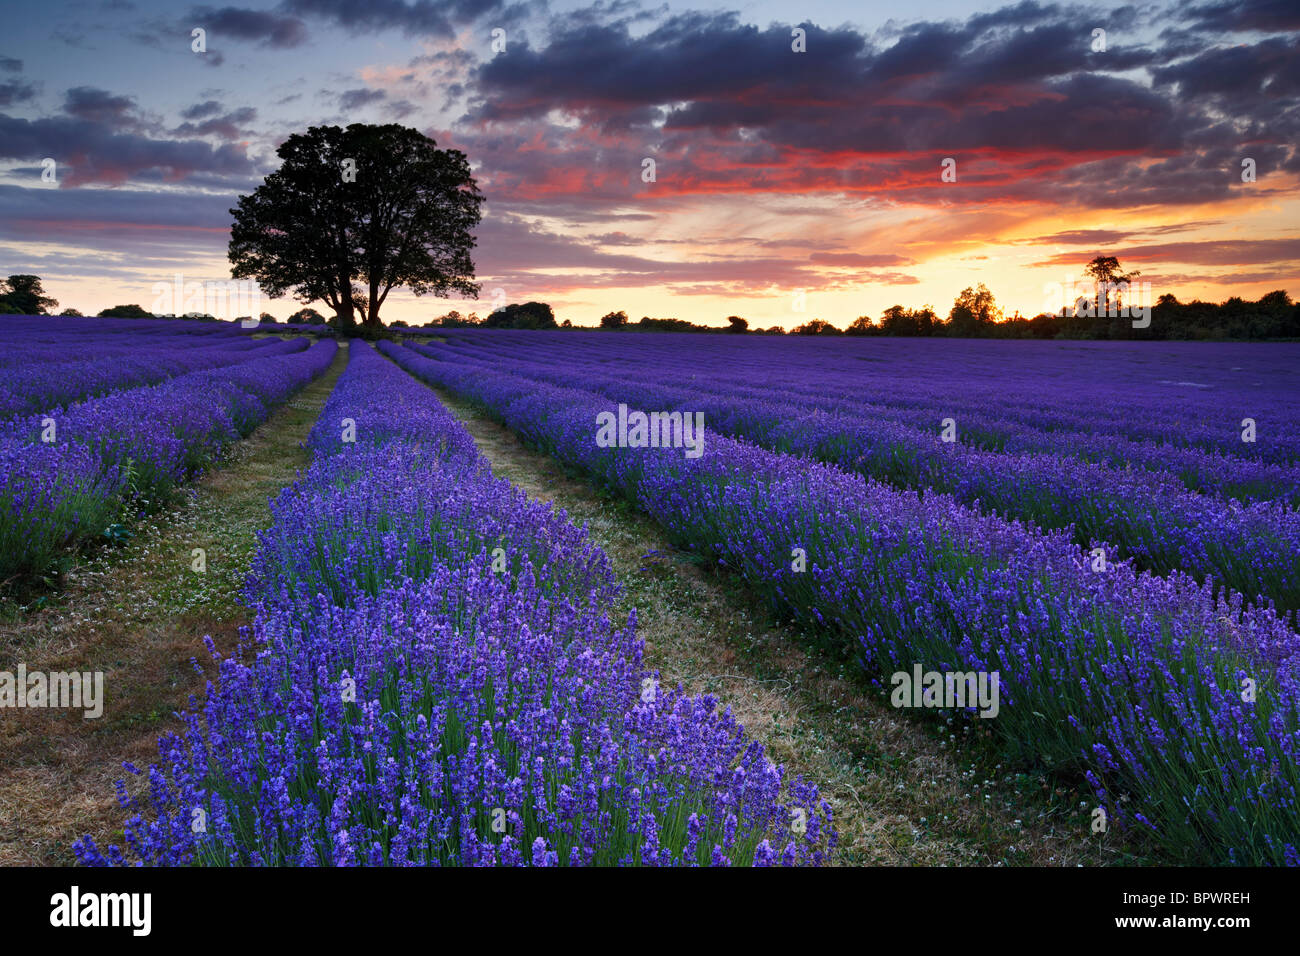 A beautiful summers evening at overlooking lavender farm. Stock Photo